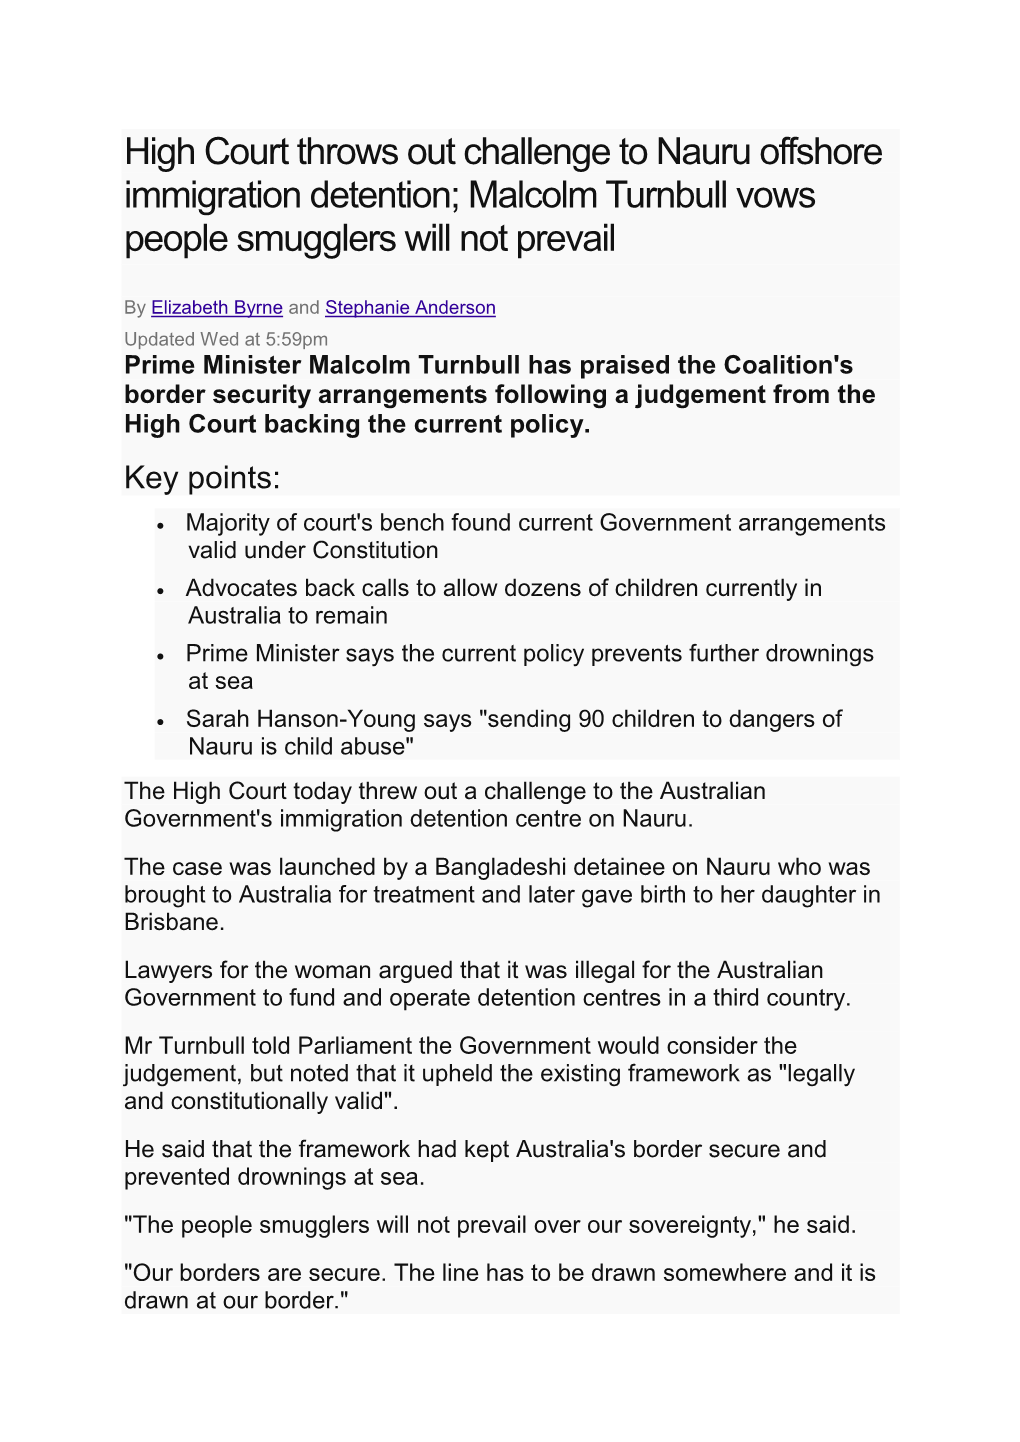 High Court Throws out Challenge to Nauru Offshore Immigration Detention; Malcolm Turnbull Vows People Smugglers Will Not Prevail